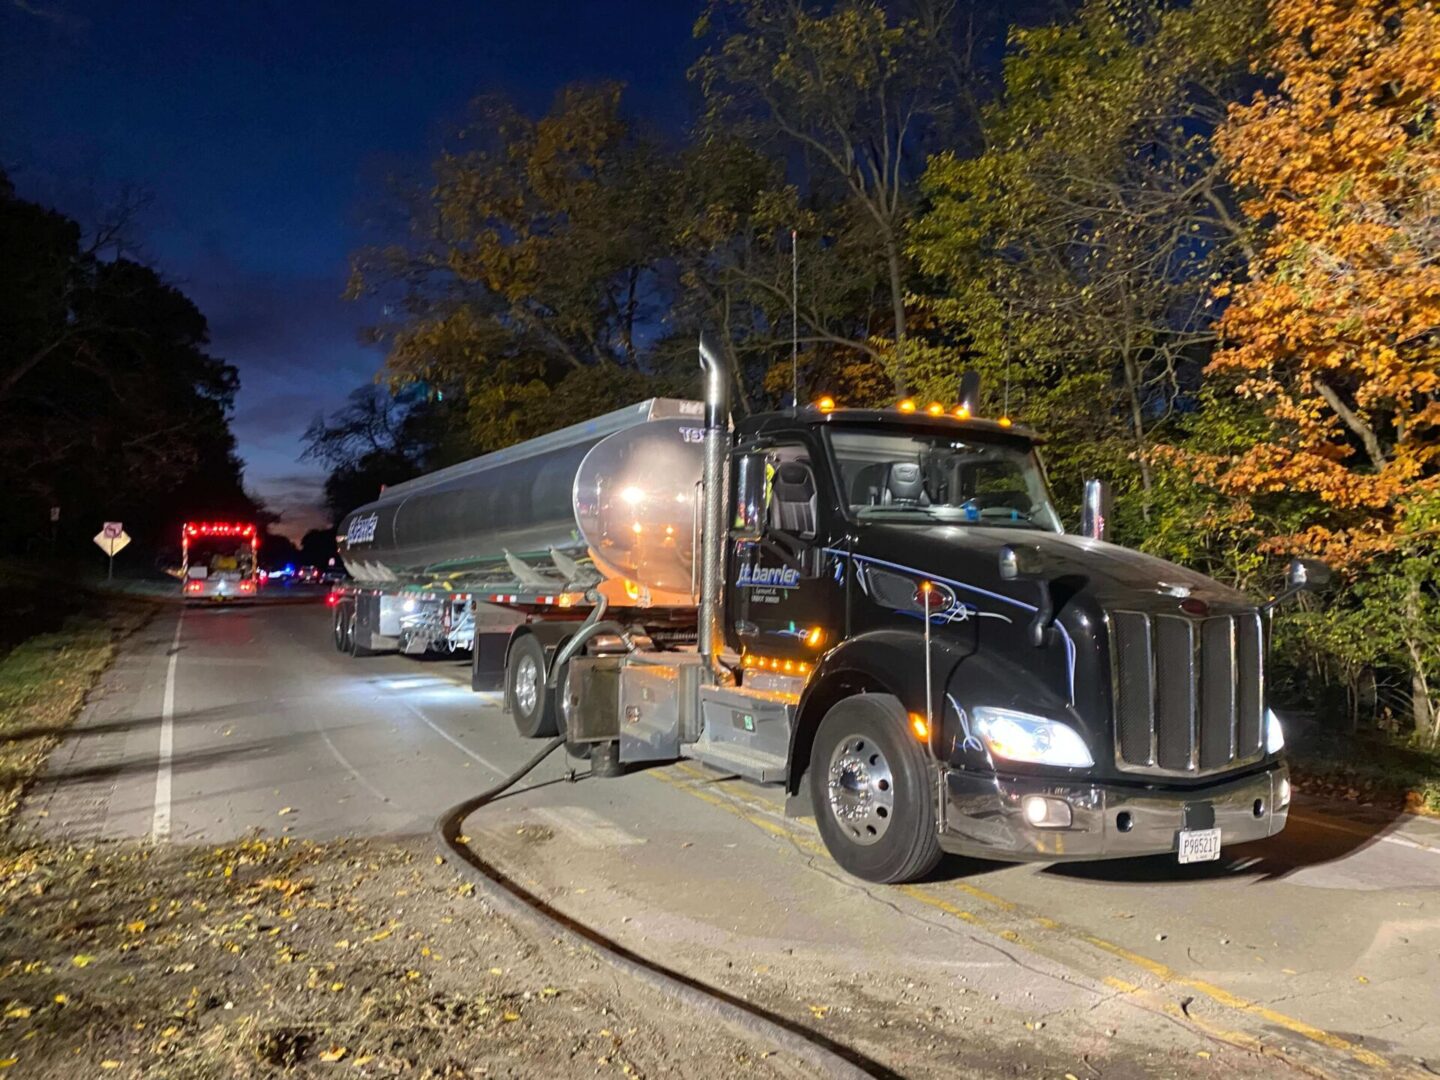 A large truck is parked on the side of a road at night.